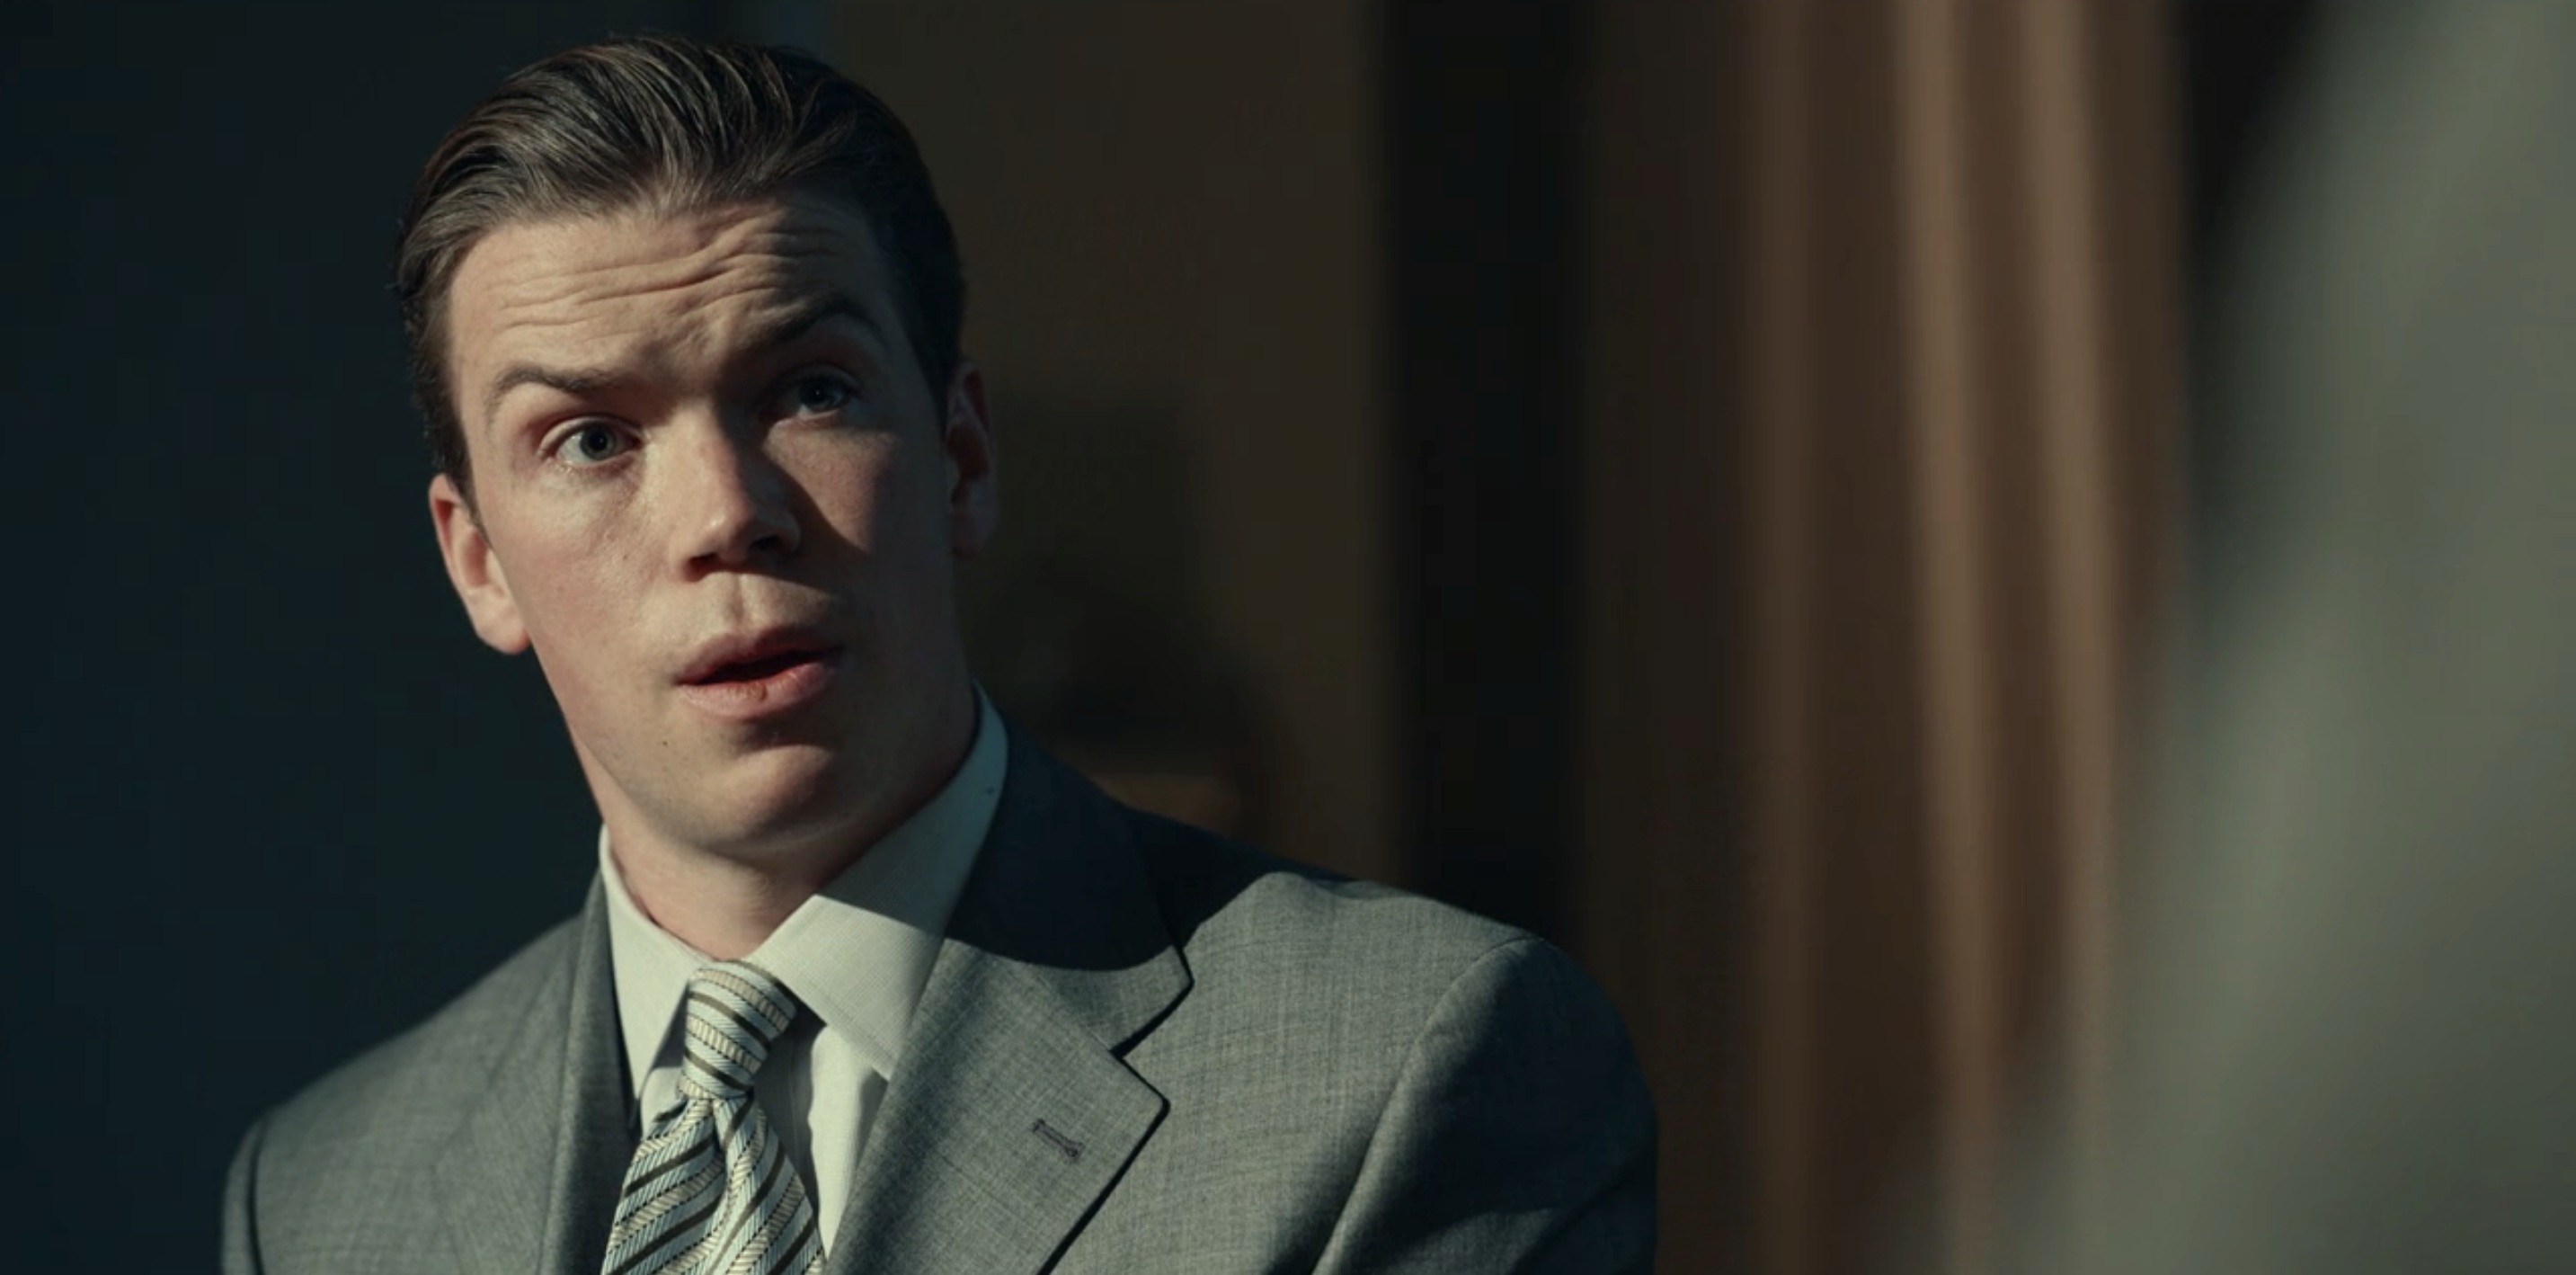 Dopesick Cast - Will Poulter as Billy Cutler